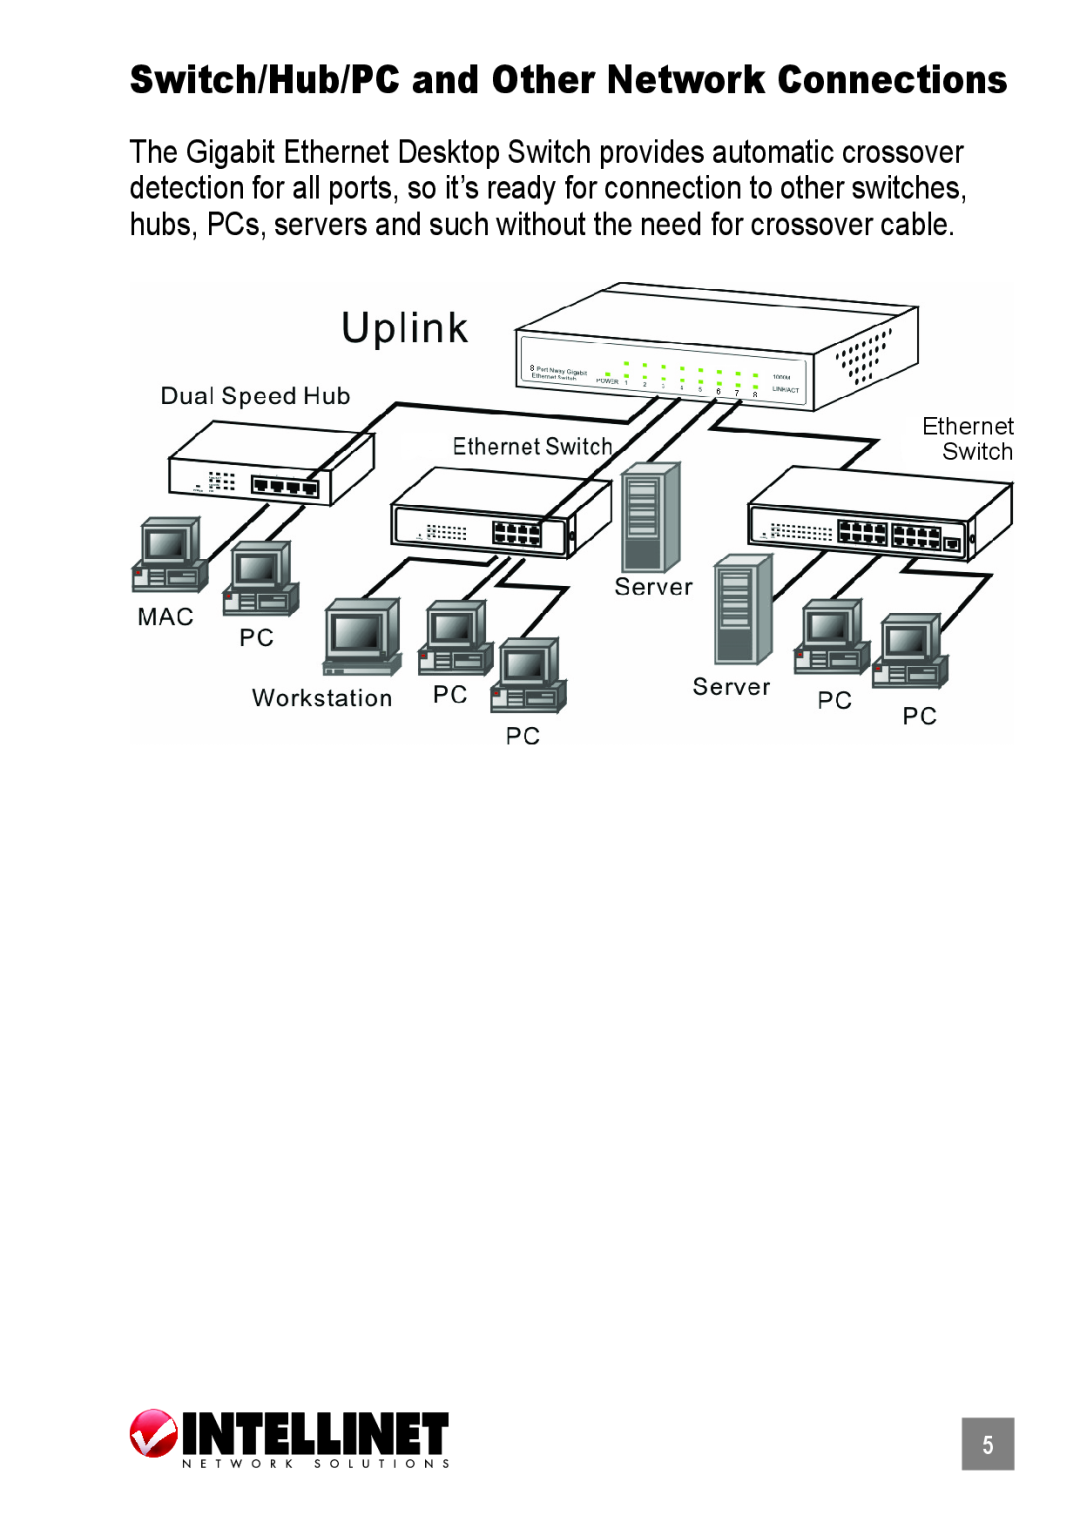 Intellinet Network Solutions 530378, 530347 user manual Switch/Hub/PC and Other Network Connections, Ethernet Switch 